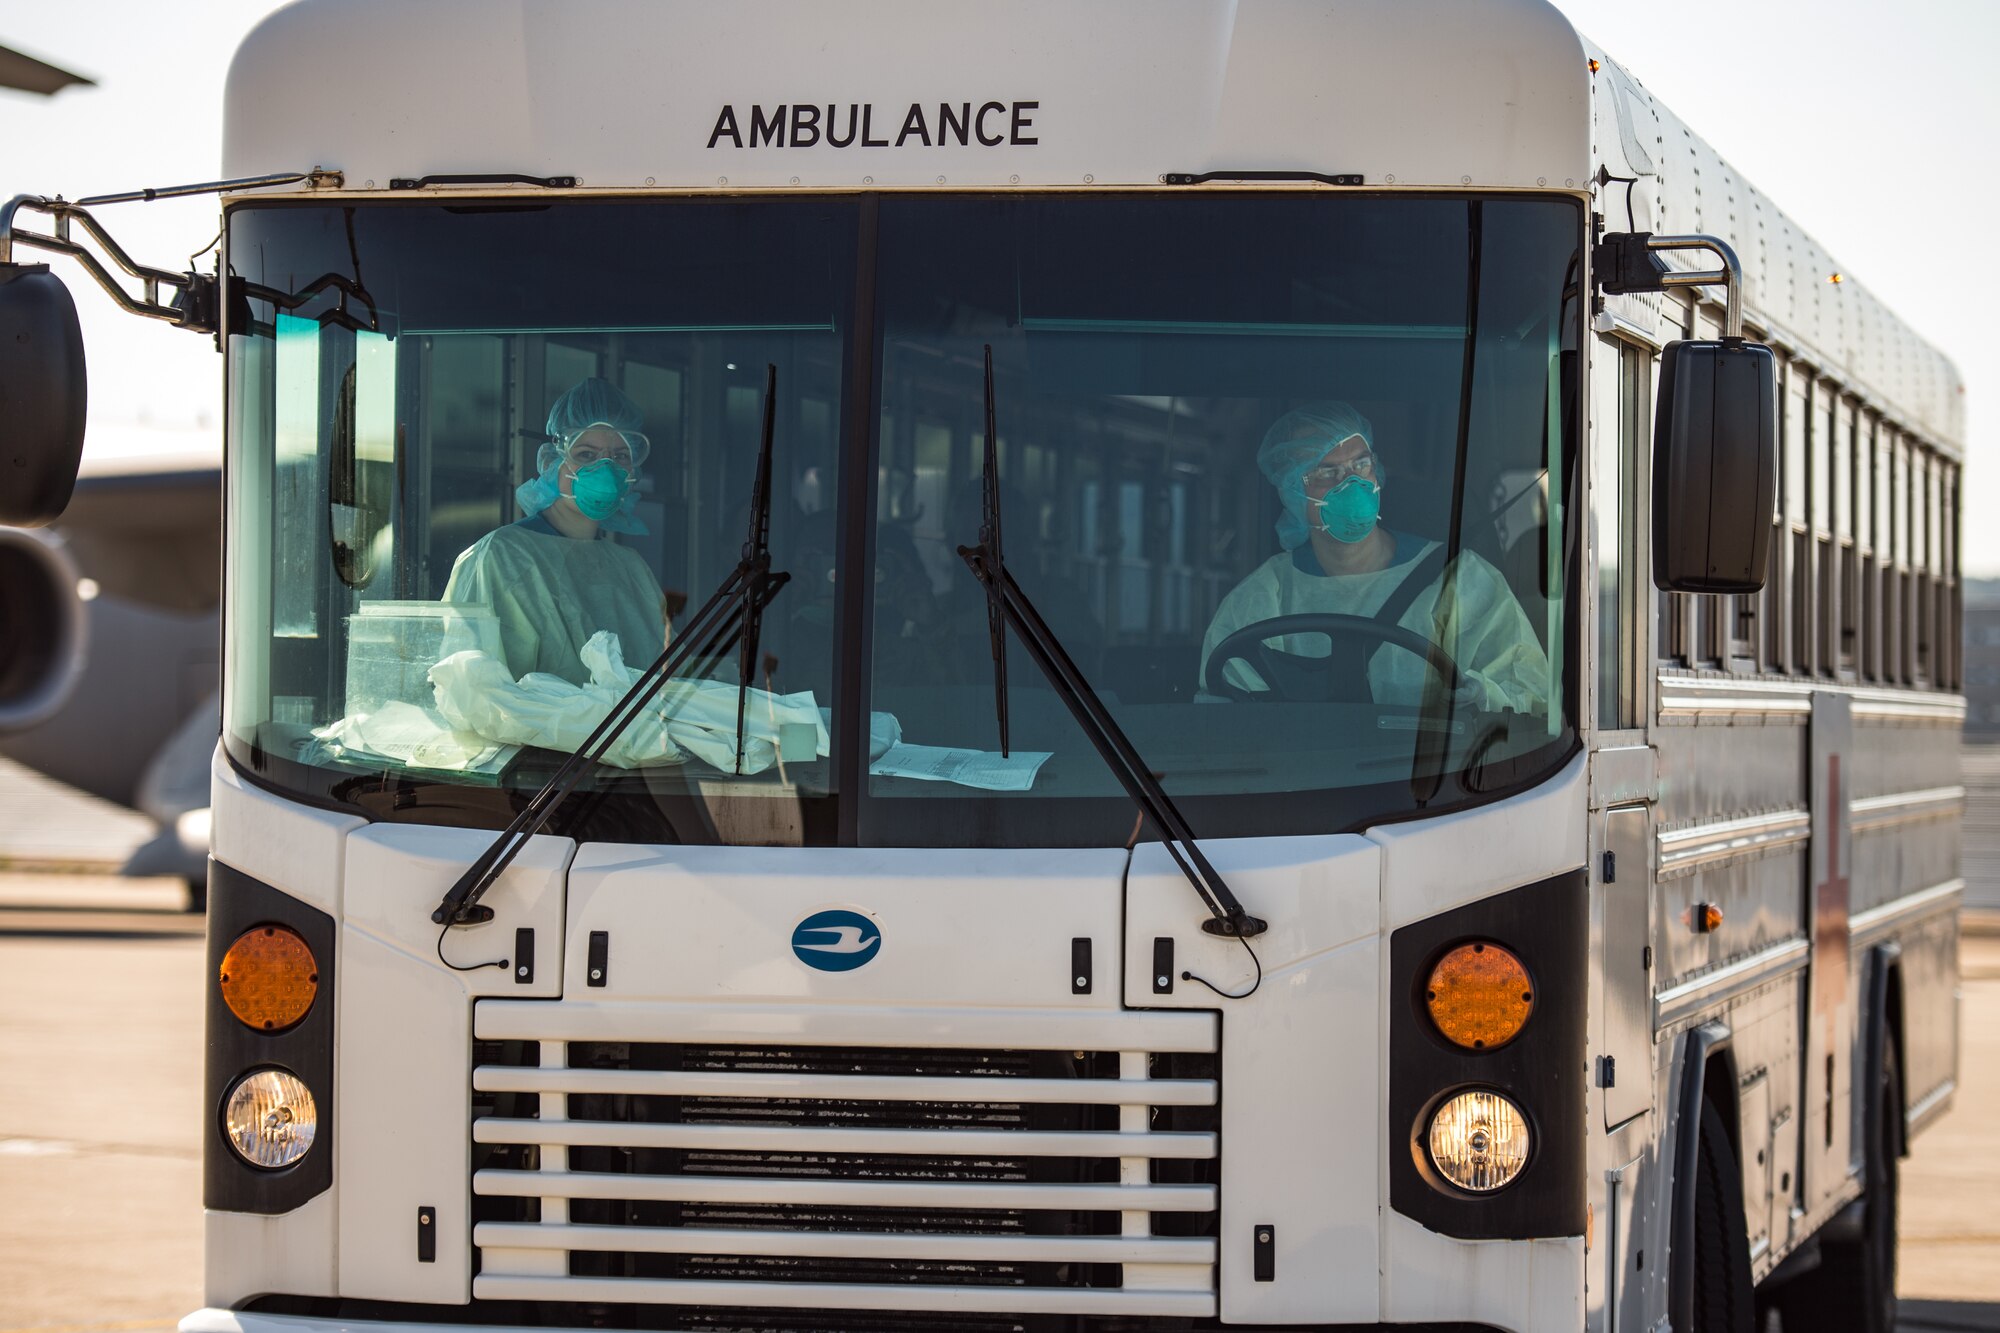 U.S. Air Force medical personnel transfer COVID-19 patients from the flightline at Ramstein Air Base, Germany, to Landstuhl Regional Medical Center, May 16, 2020.